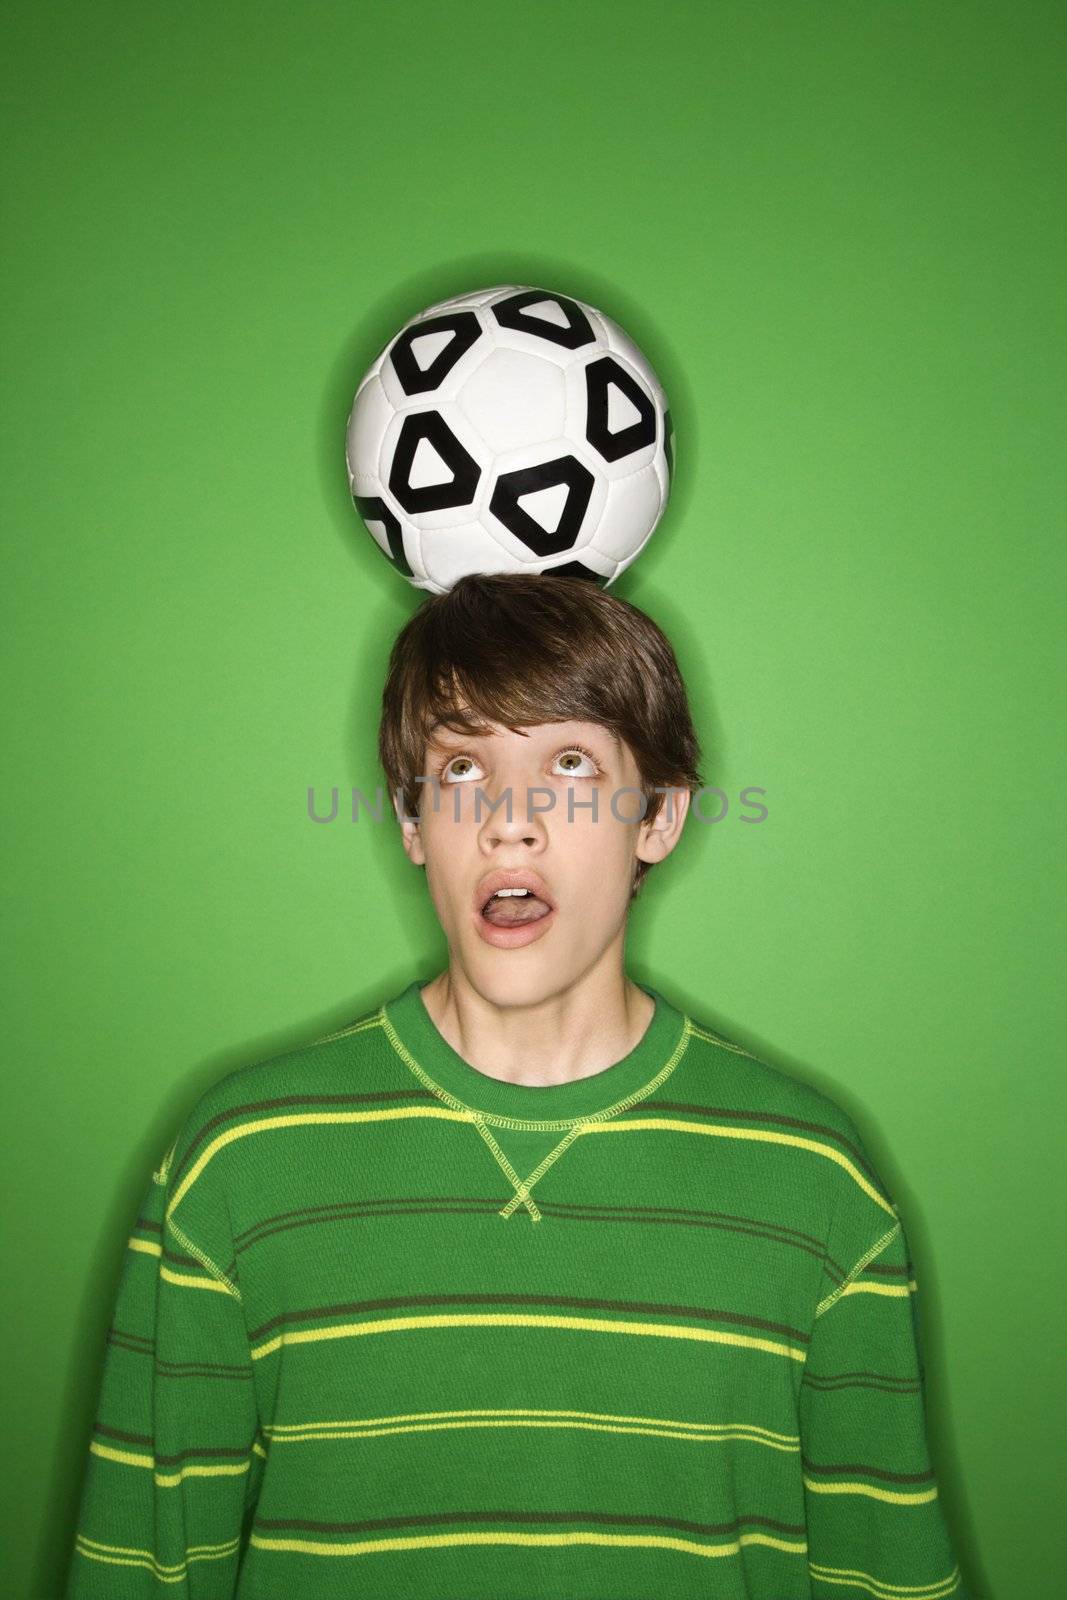 Portrait of Caucasian teen boy balancing soccer ball on head and looking up at it with eyes.